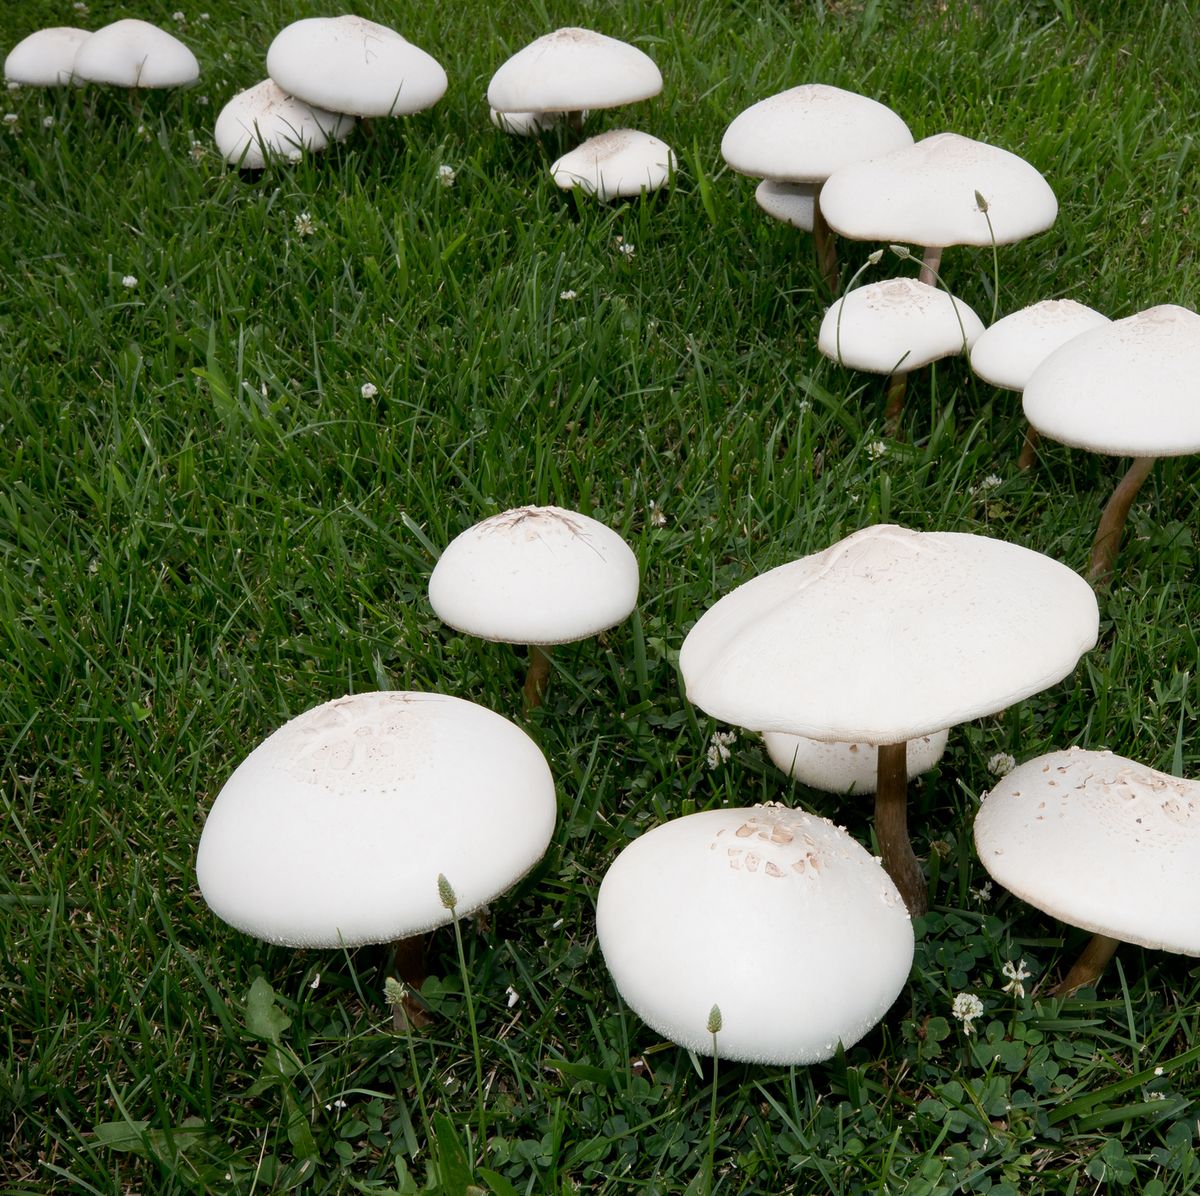 Why Have Mushrooms Taken Over My Lawn